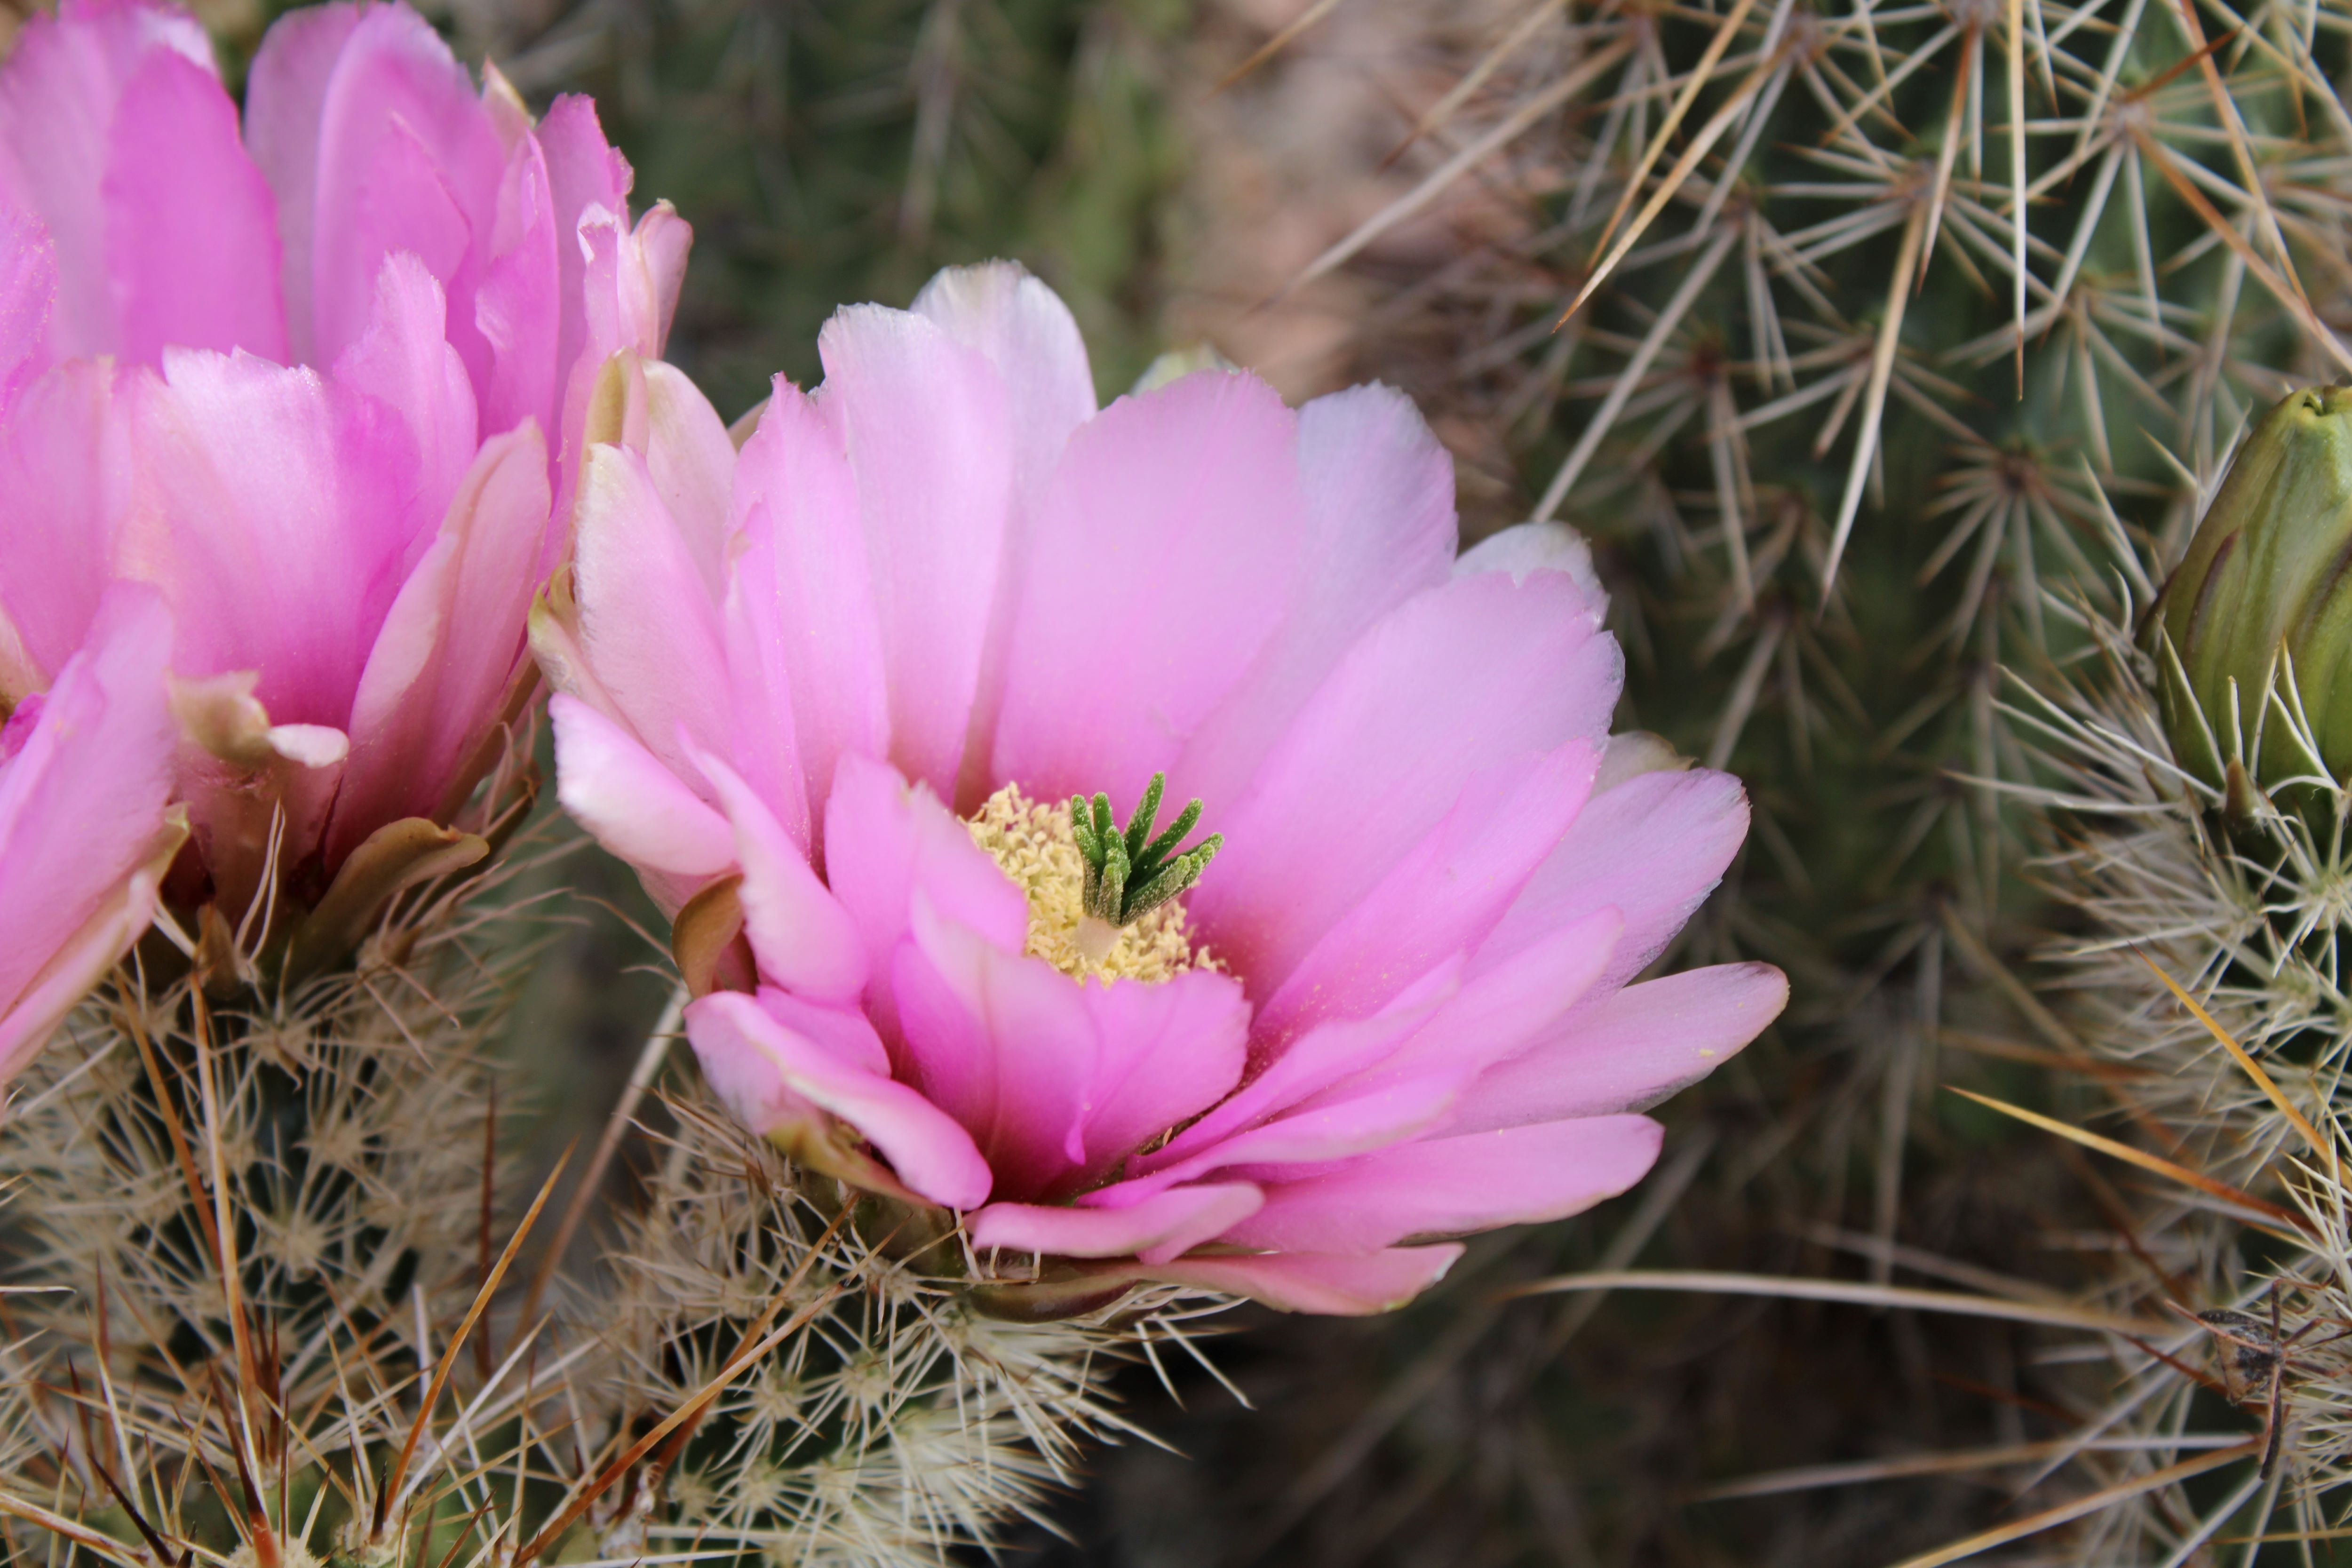 Photo by Kirra Medlyn  |  The bright pink flowers of the native strawberry hedgehog cactus. Truly a beautiful sight to see every spring.